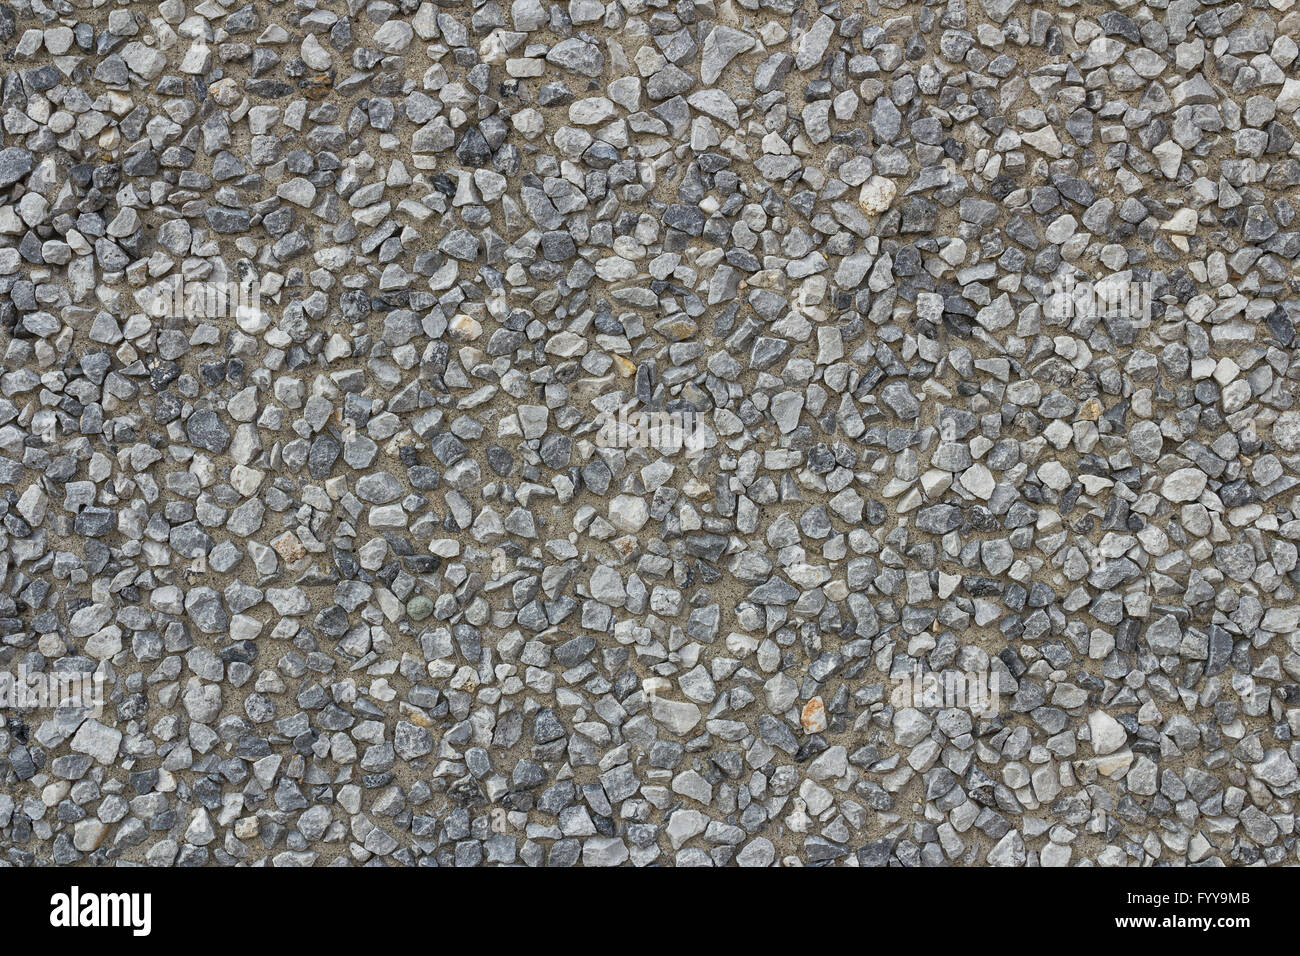 Background small pebbles Stock Photo